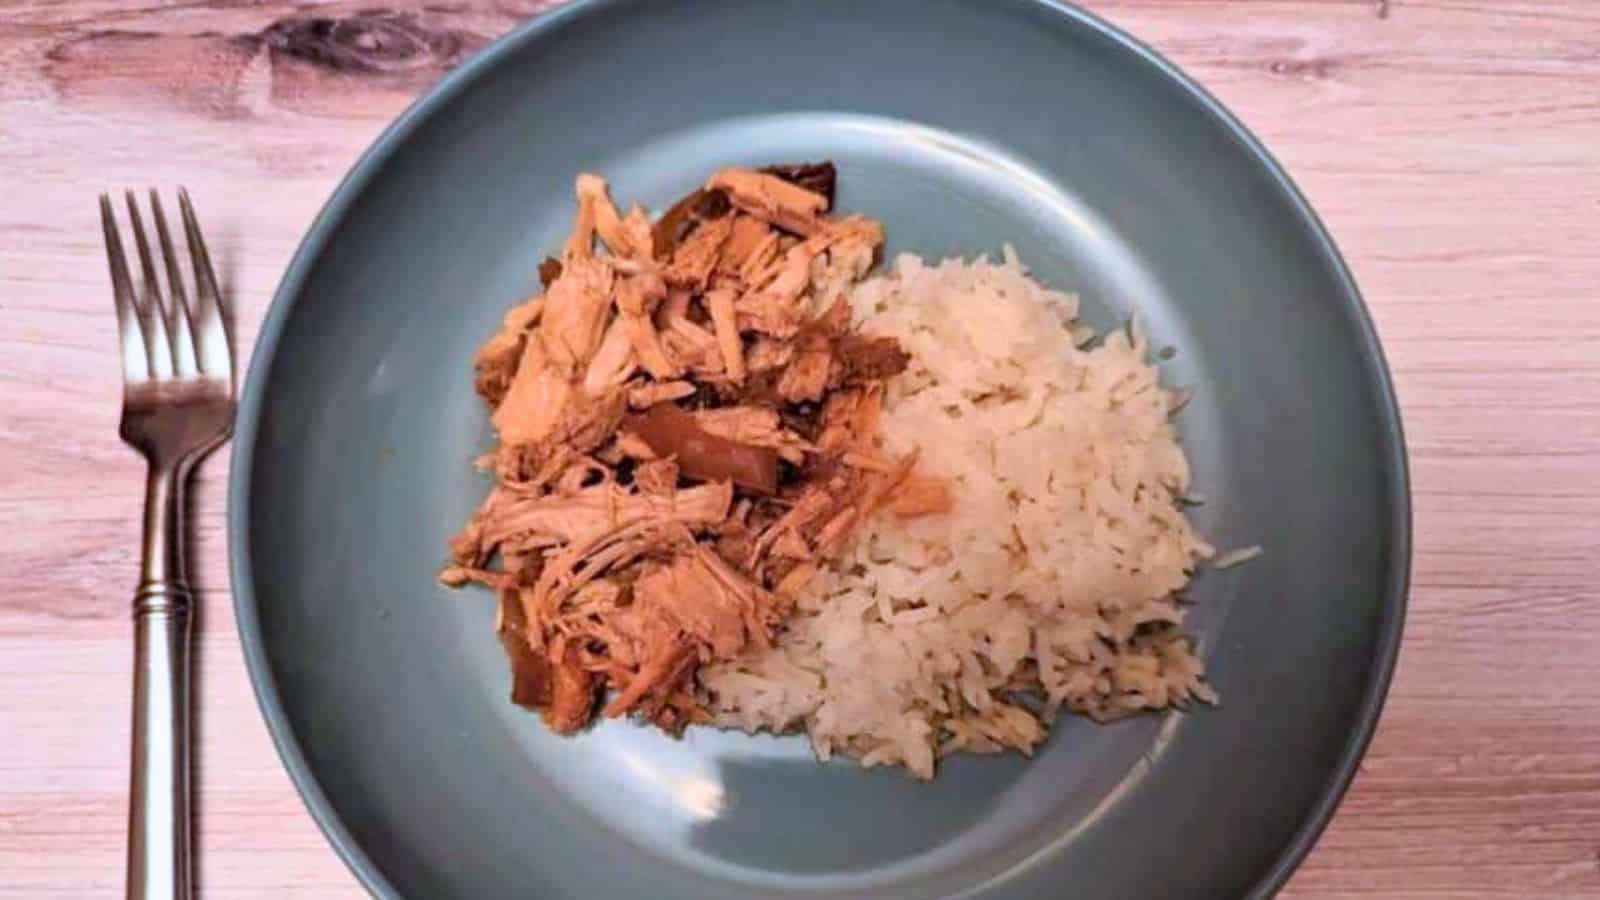 Image shows an overhead shot of Slow Cooker Garlic Roast Pork on a blue plate served with rice.